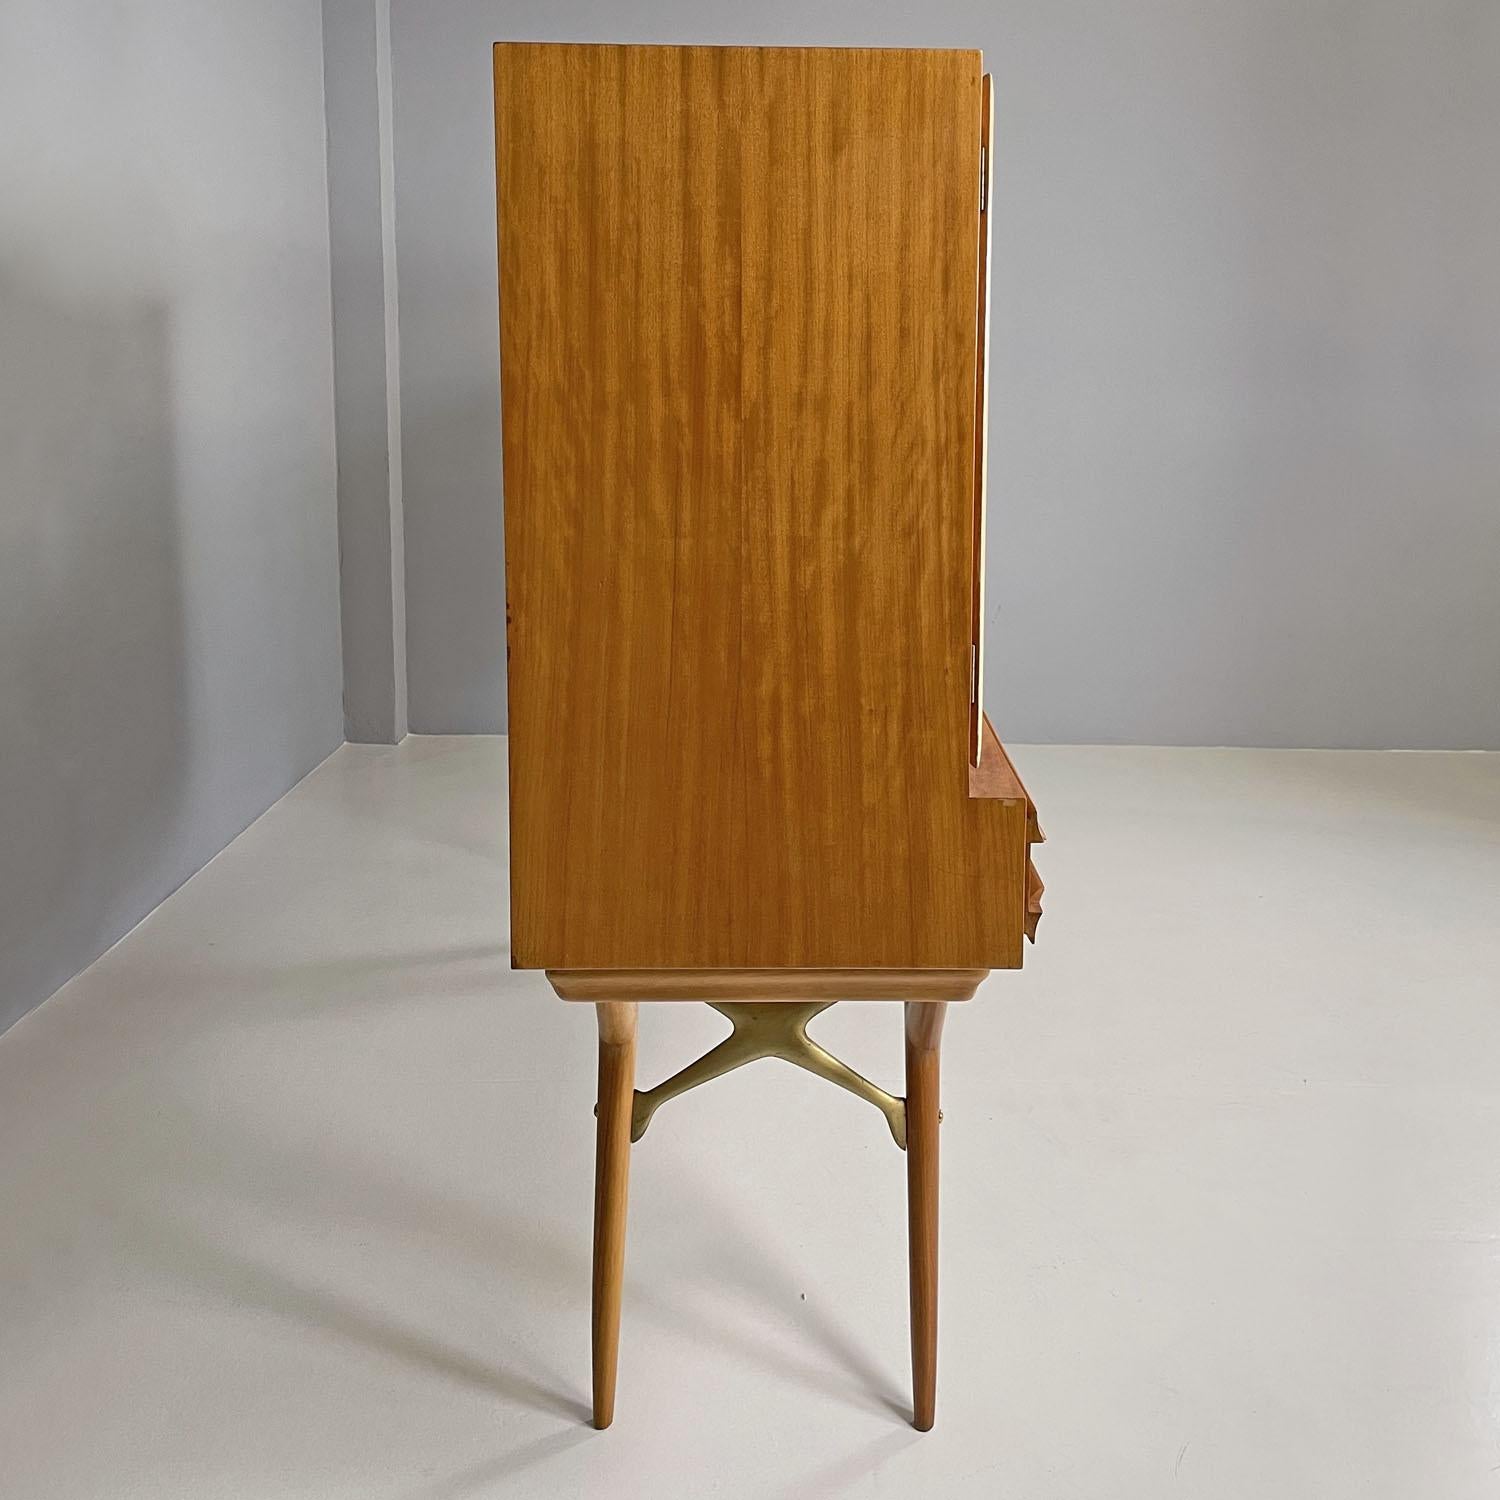 Italian mid-century modern wood and parchment highboard Palazzi dell'Arte, 1950s For Sale 1